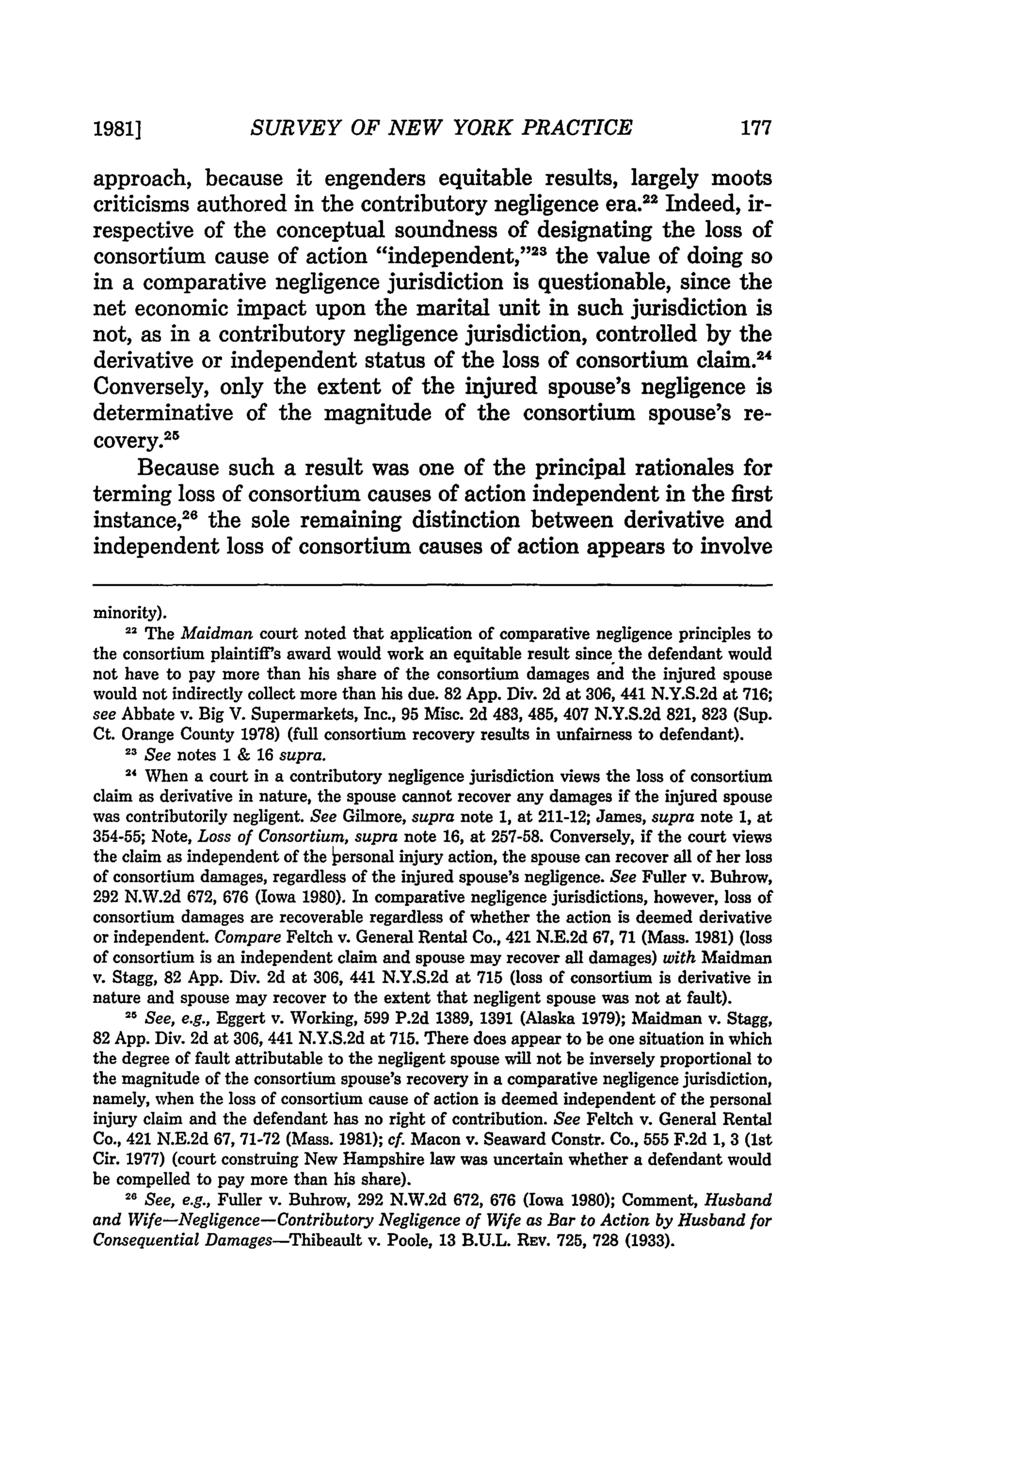 1981] SURVEY OF NEW YORK PRACTICE approach, because it engenders equitable results, largely moots criticisms authored in the contributory negligence era.